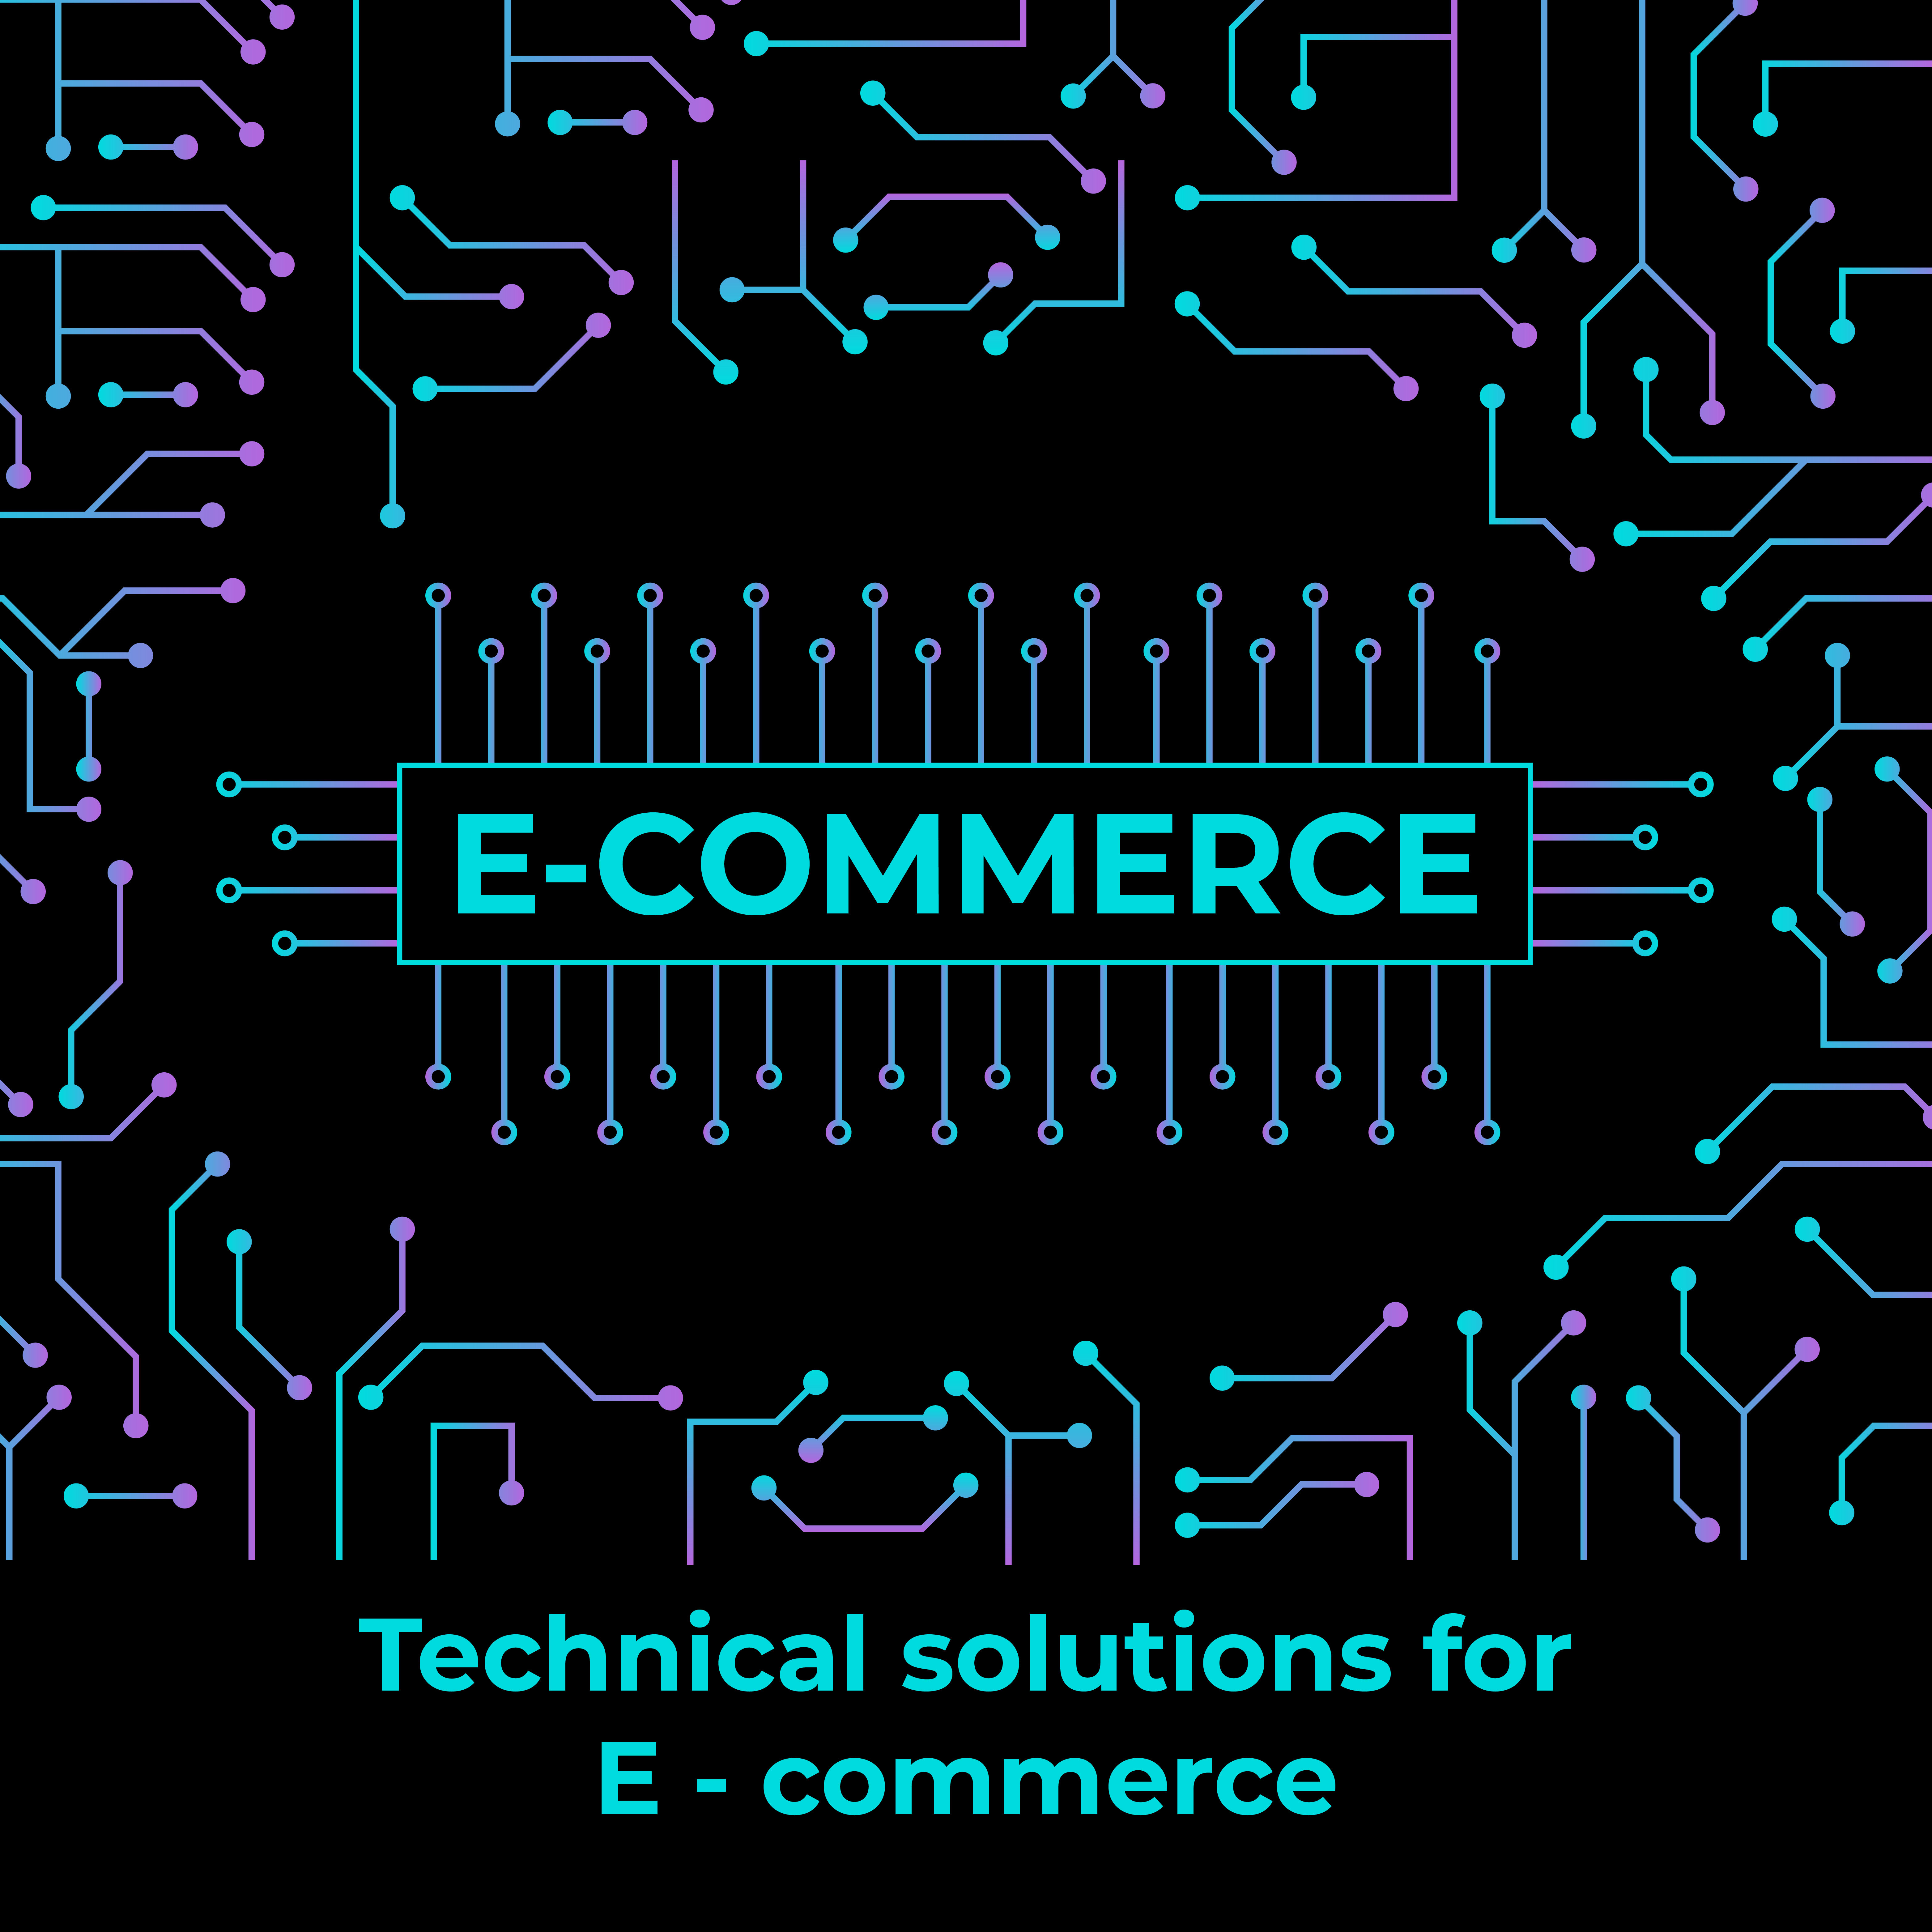 technology solutions with E-commerce businesses